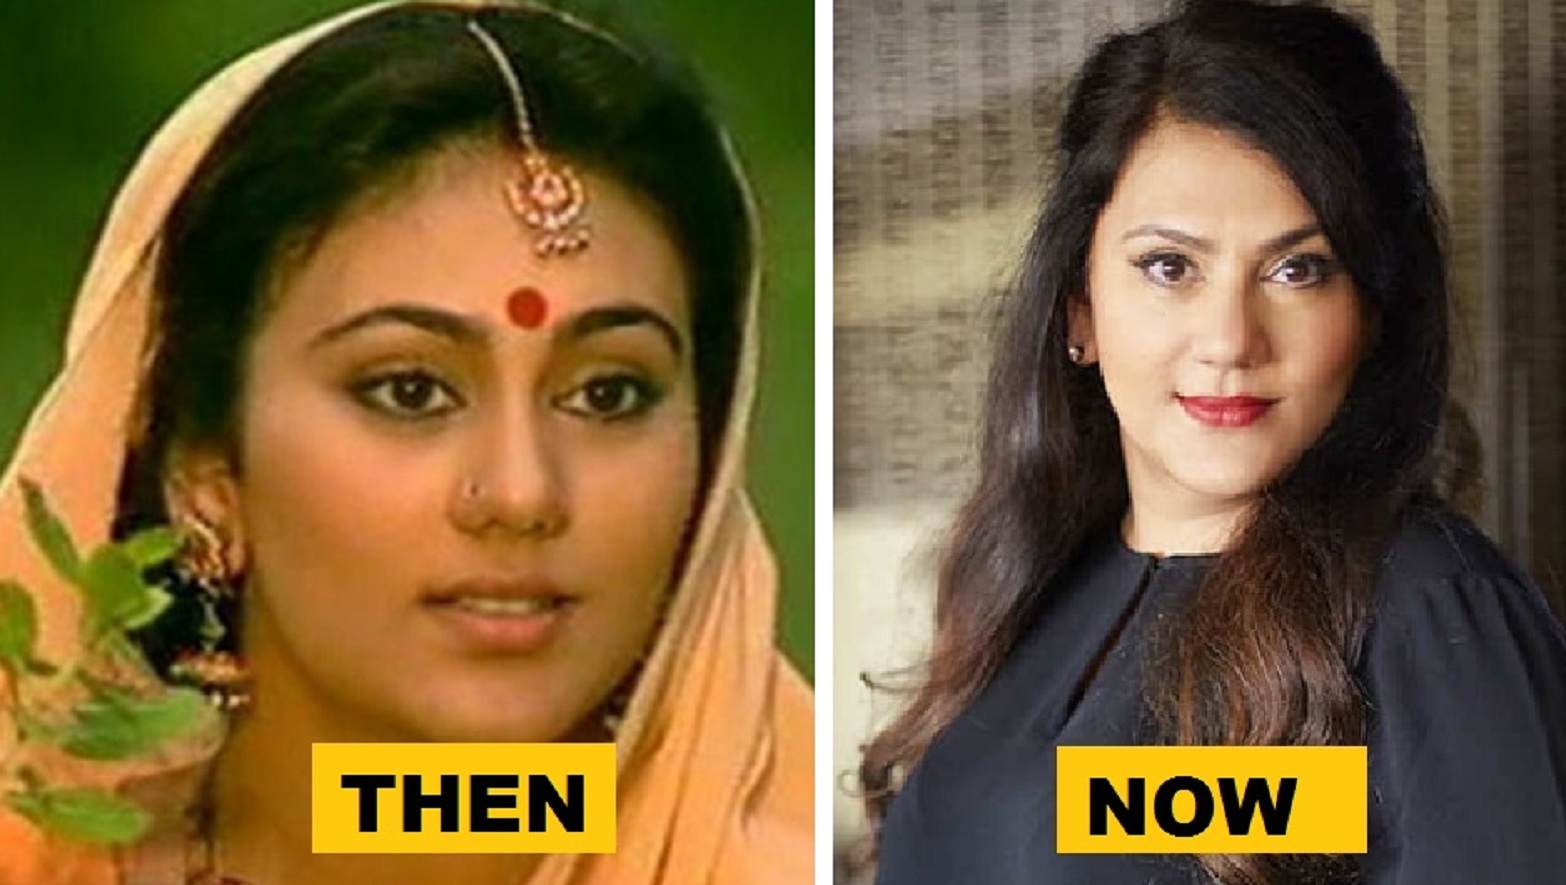 Dipikka Chikhalia AKA Sita from Ramayan: Then and Now! See what the popular actress looks like after all these years…